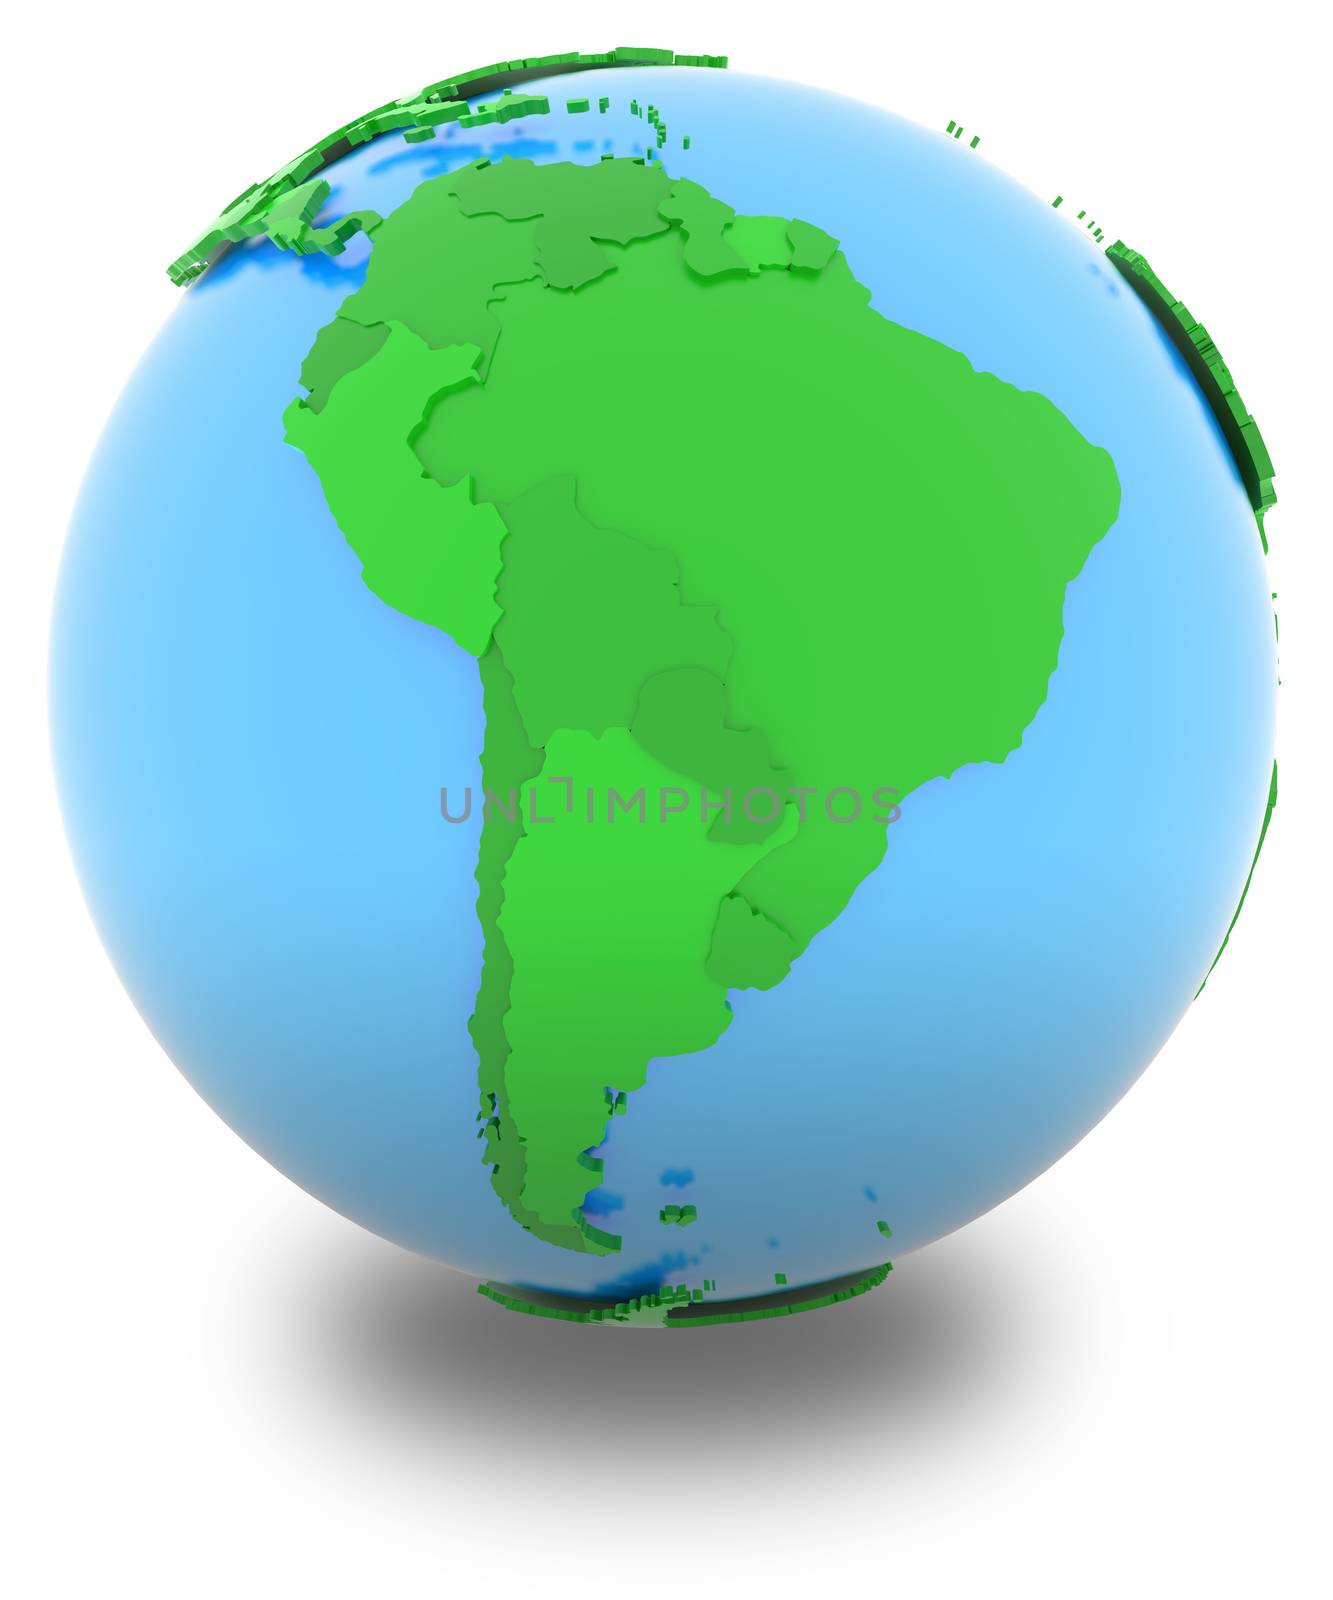 South America, political map of the world with countries in different shades of green, isolated on white background. 